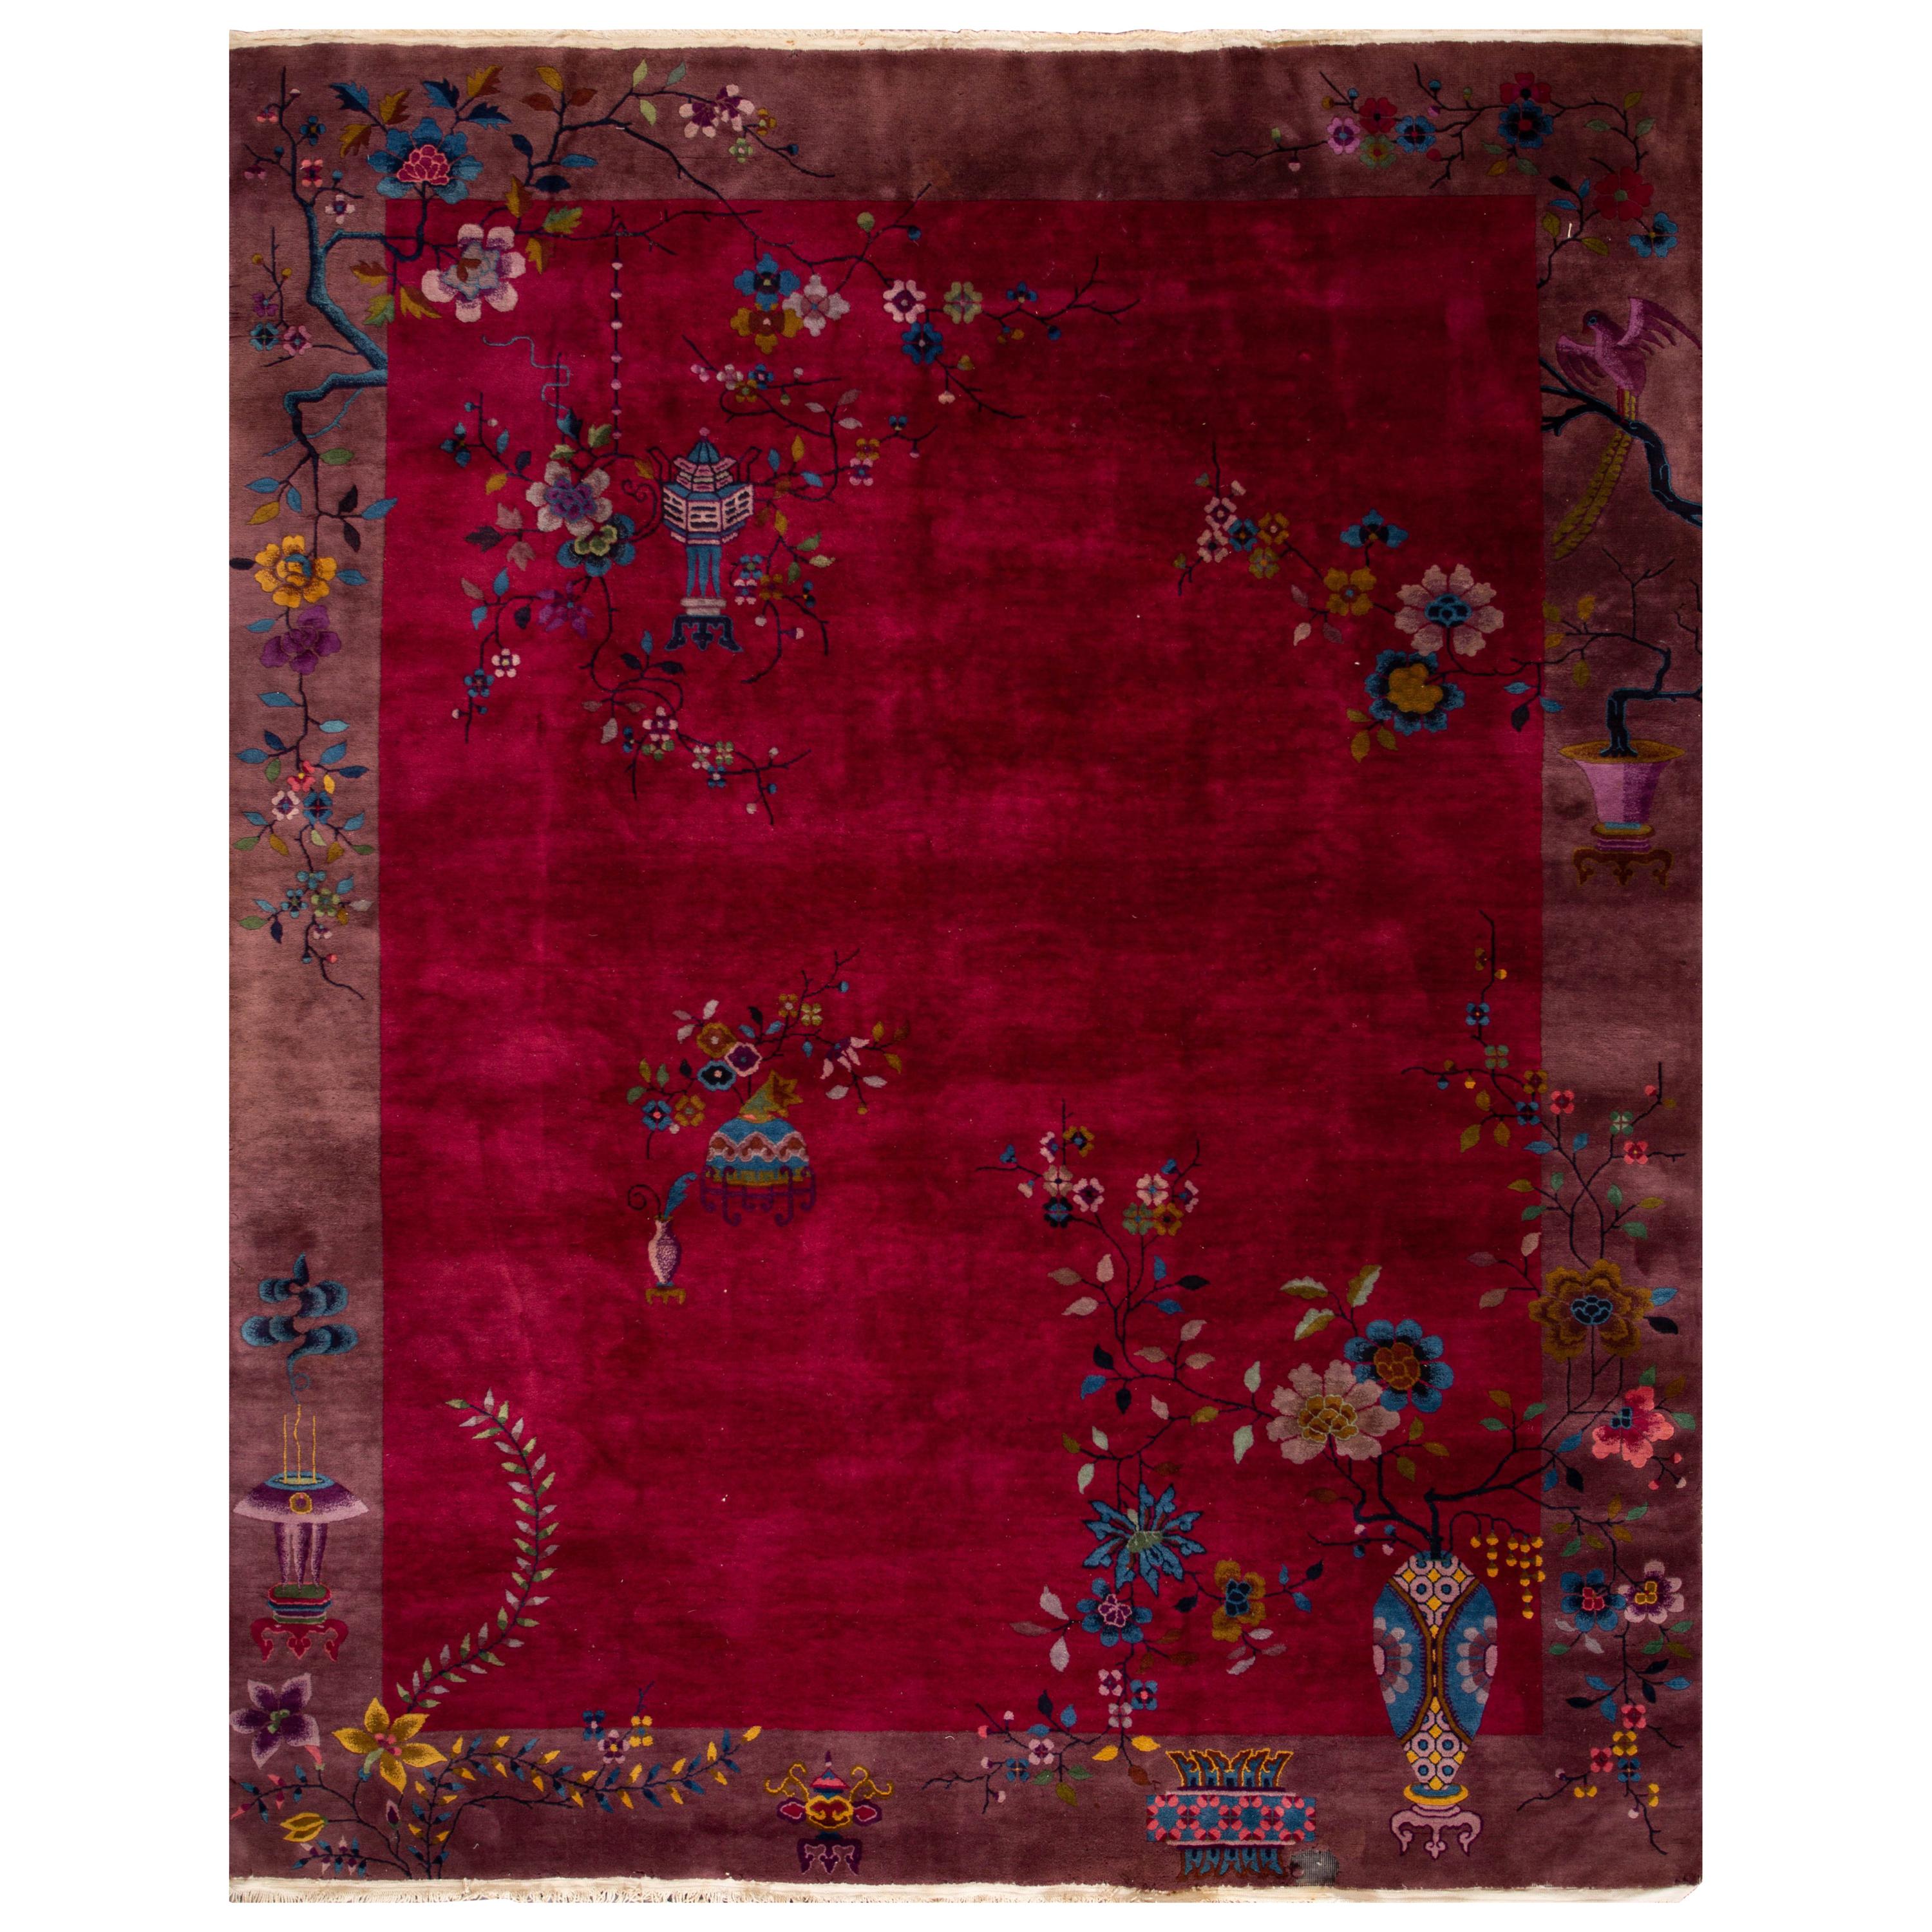 Antique Red Art Deco Chinese Wool Rug 8 Ft 10 In X 11 Ft 4 In. For Sale